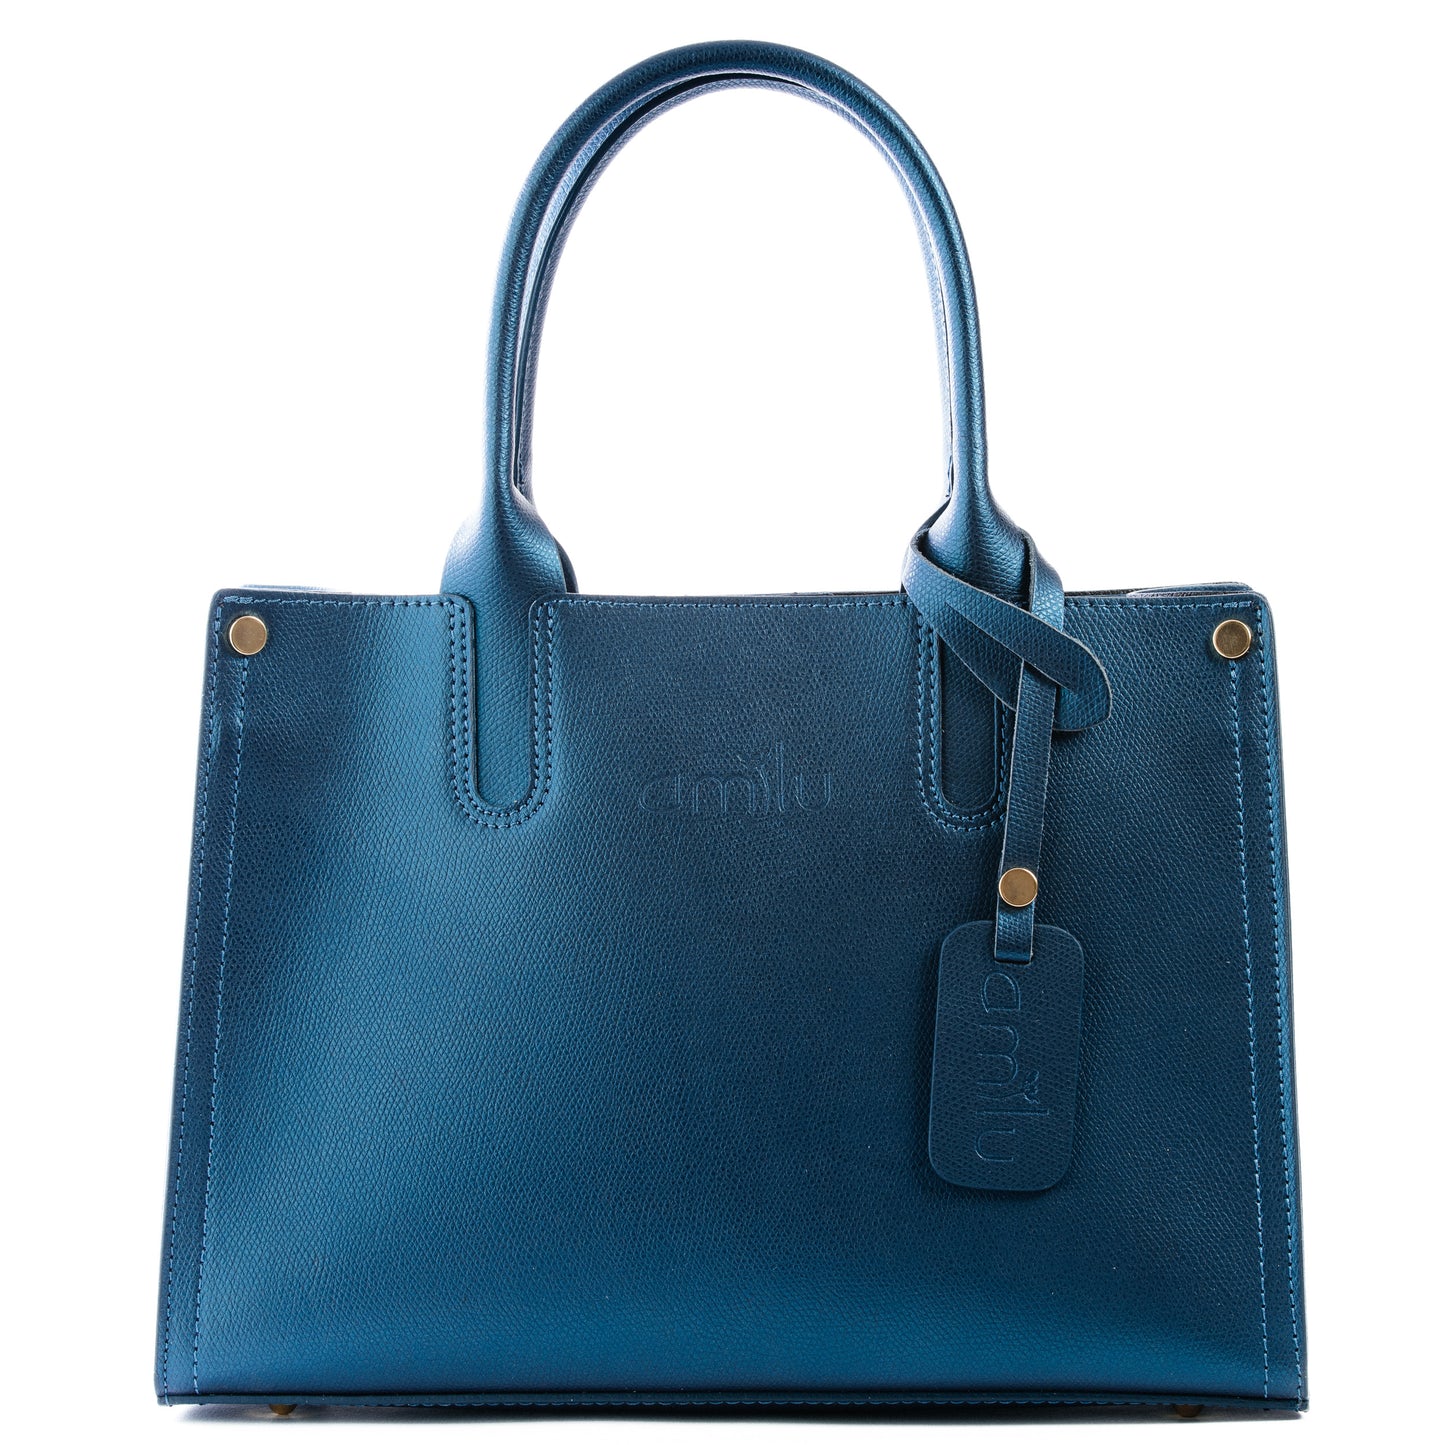 Teal Blue Real Textured Leather Grab Tote Bag - Amilu